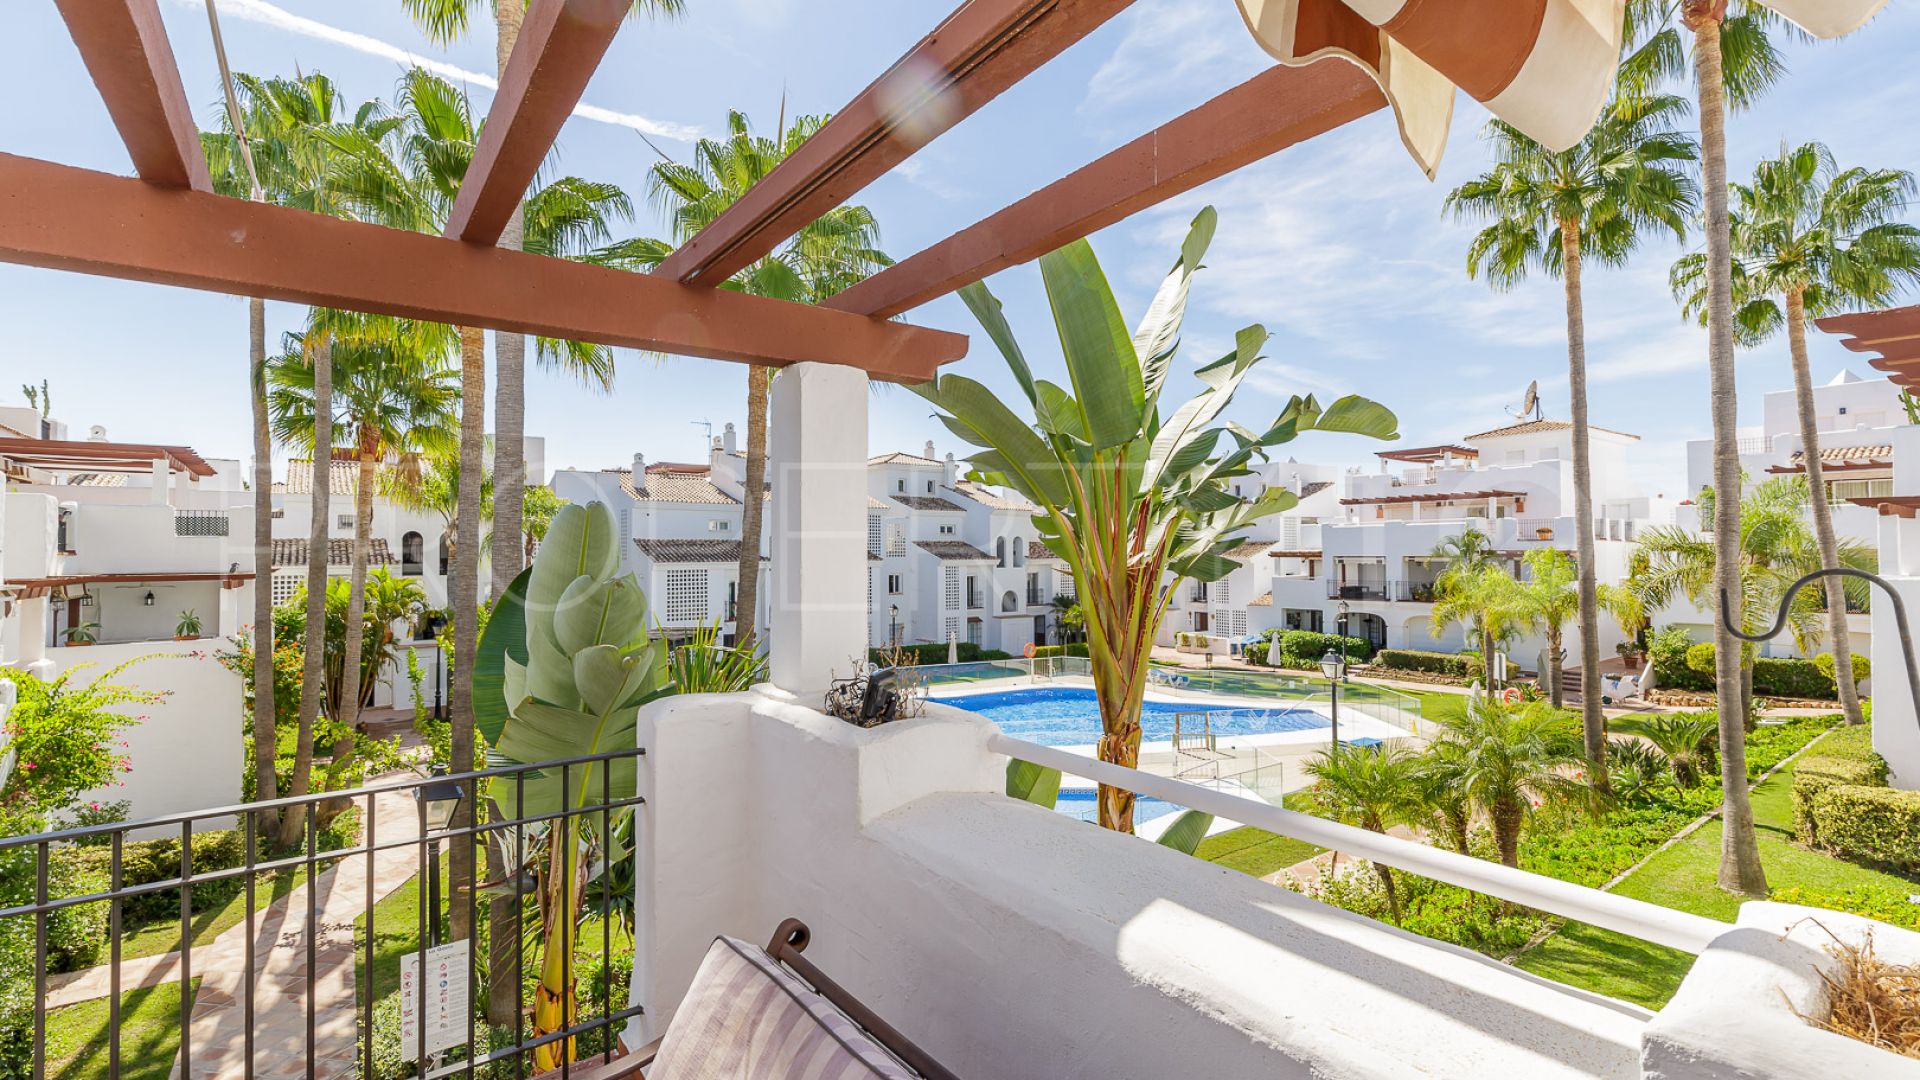 3 bedrooms apartment for sale in San Pedro Playa